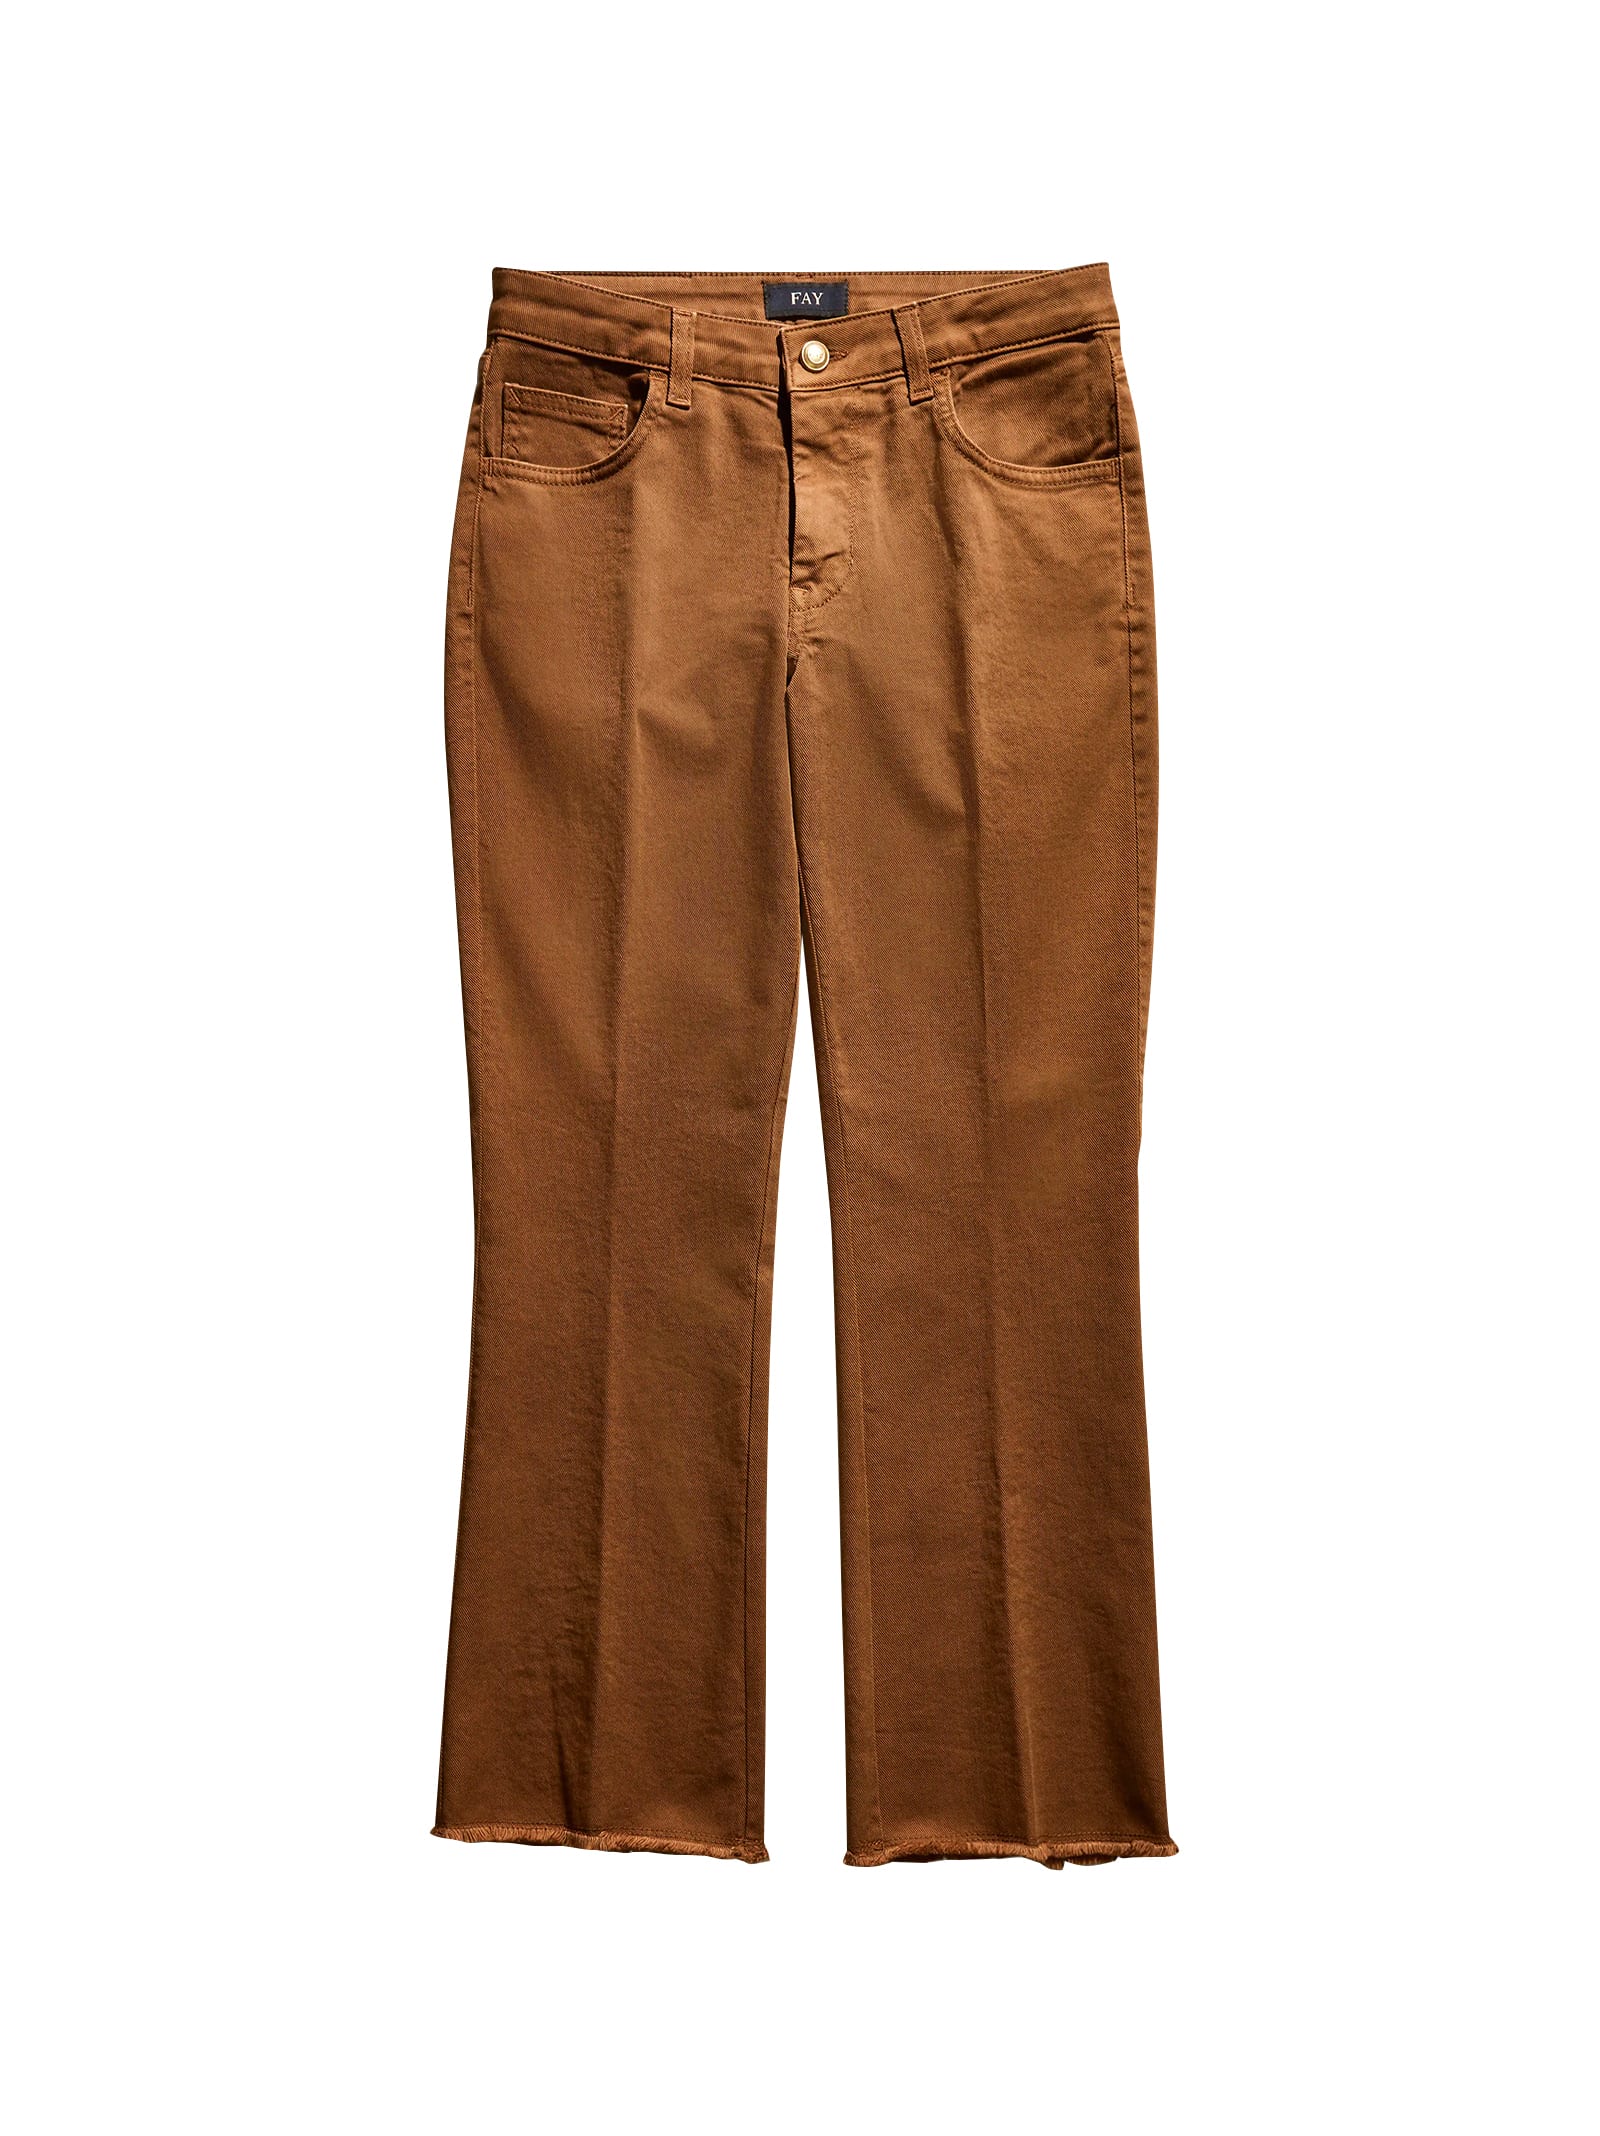 Fay Fringed 5-pocket Trousers